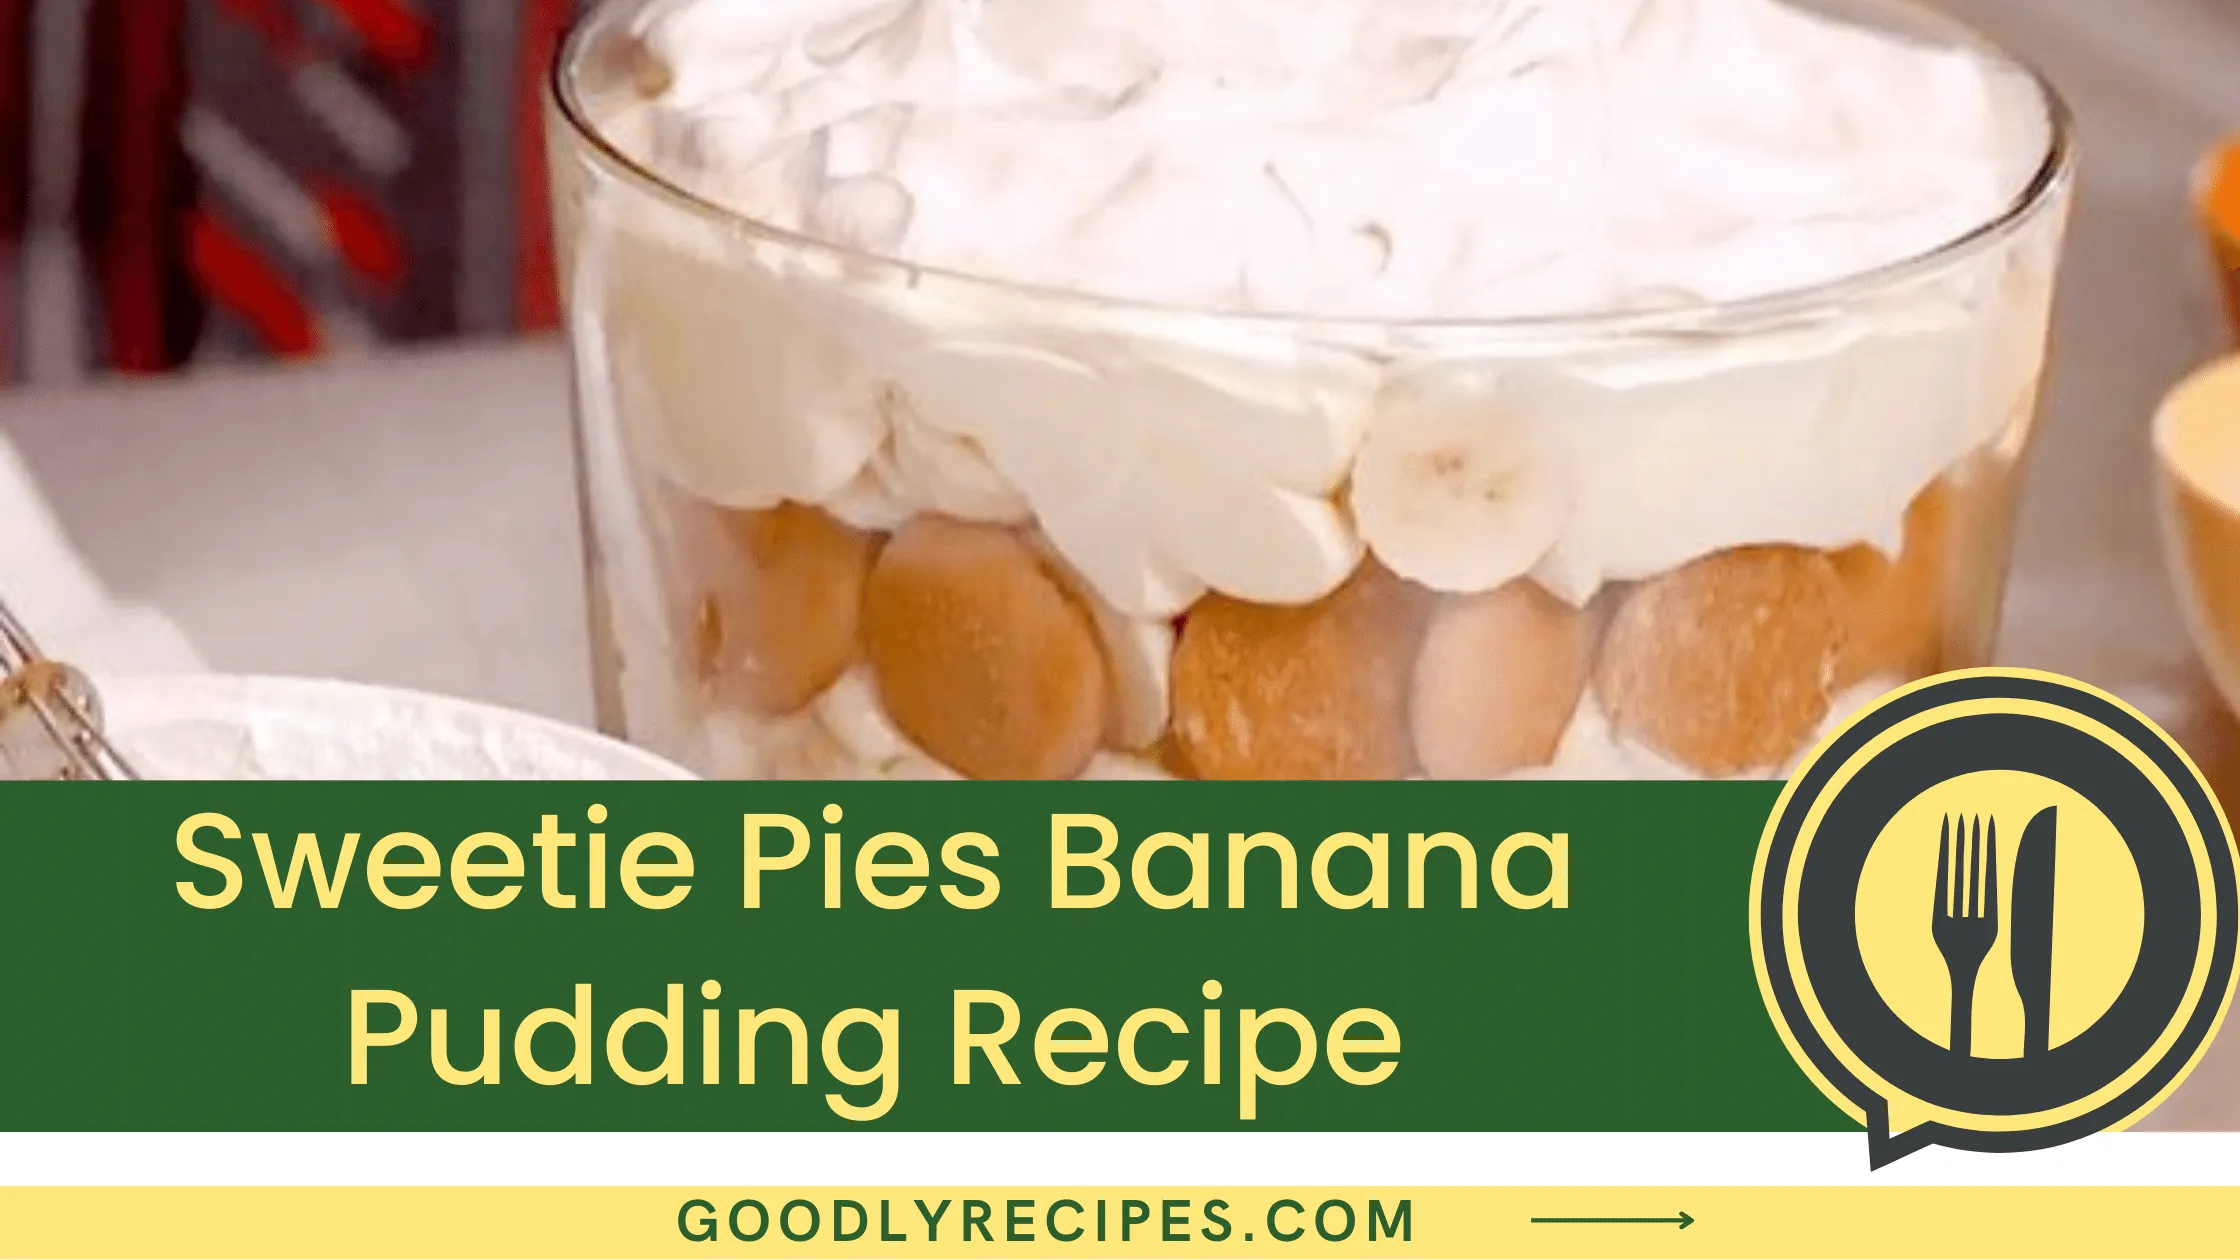 Sweetie Pies Banana Pudding Recipe - For Food Lovers